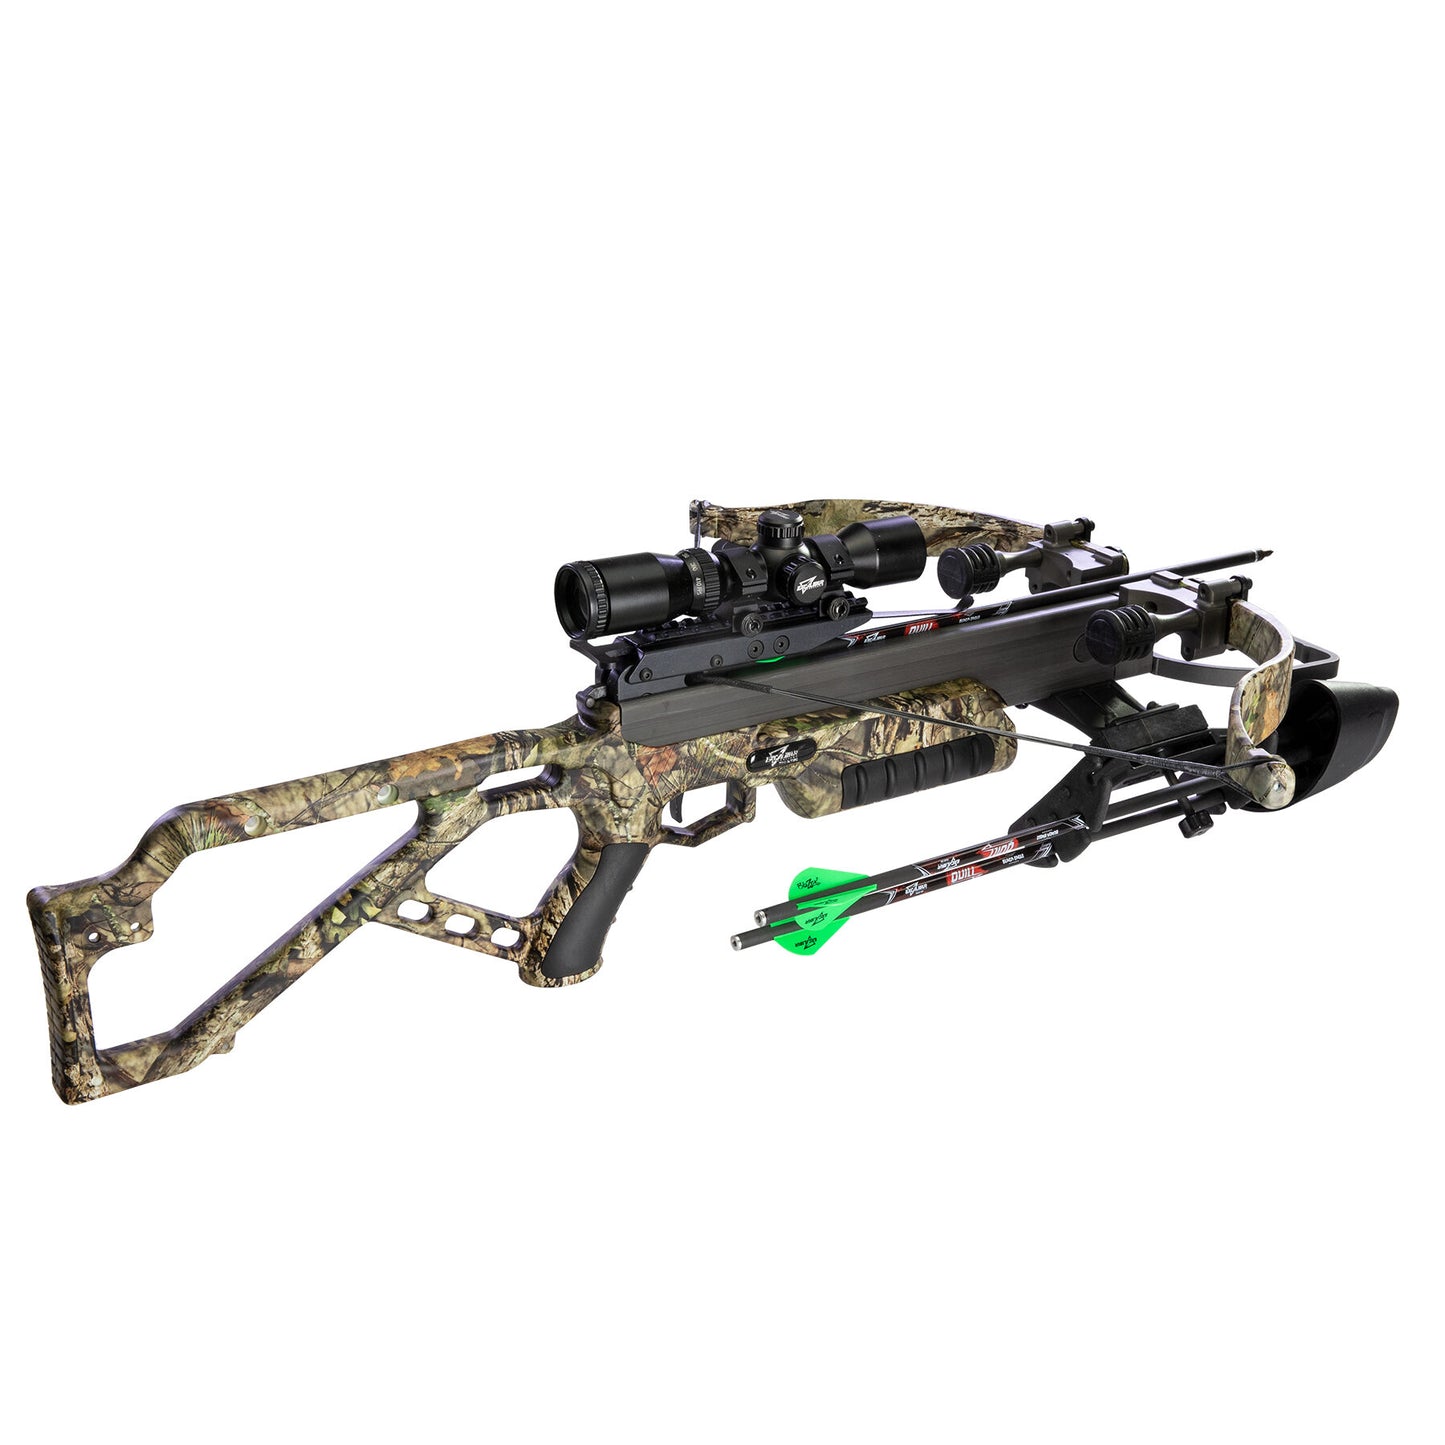 Excalibur Mag 340 Crossbow Package